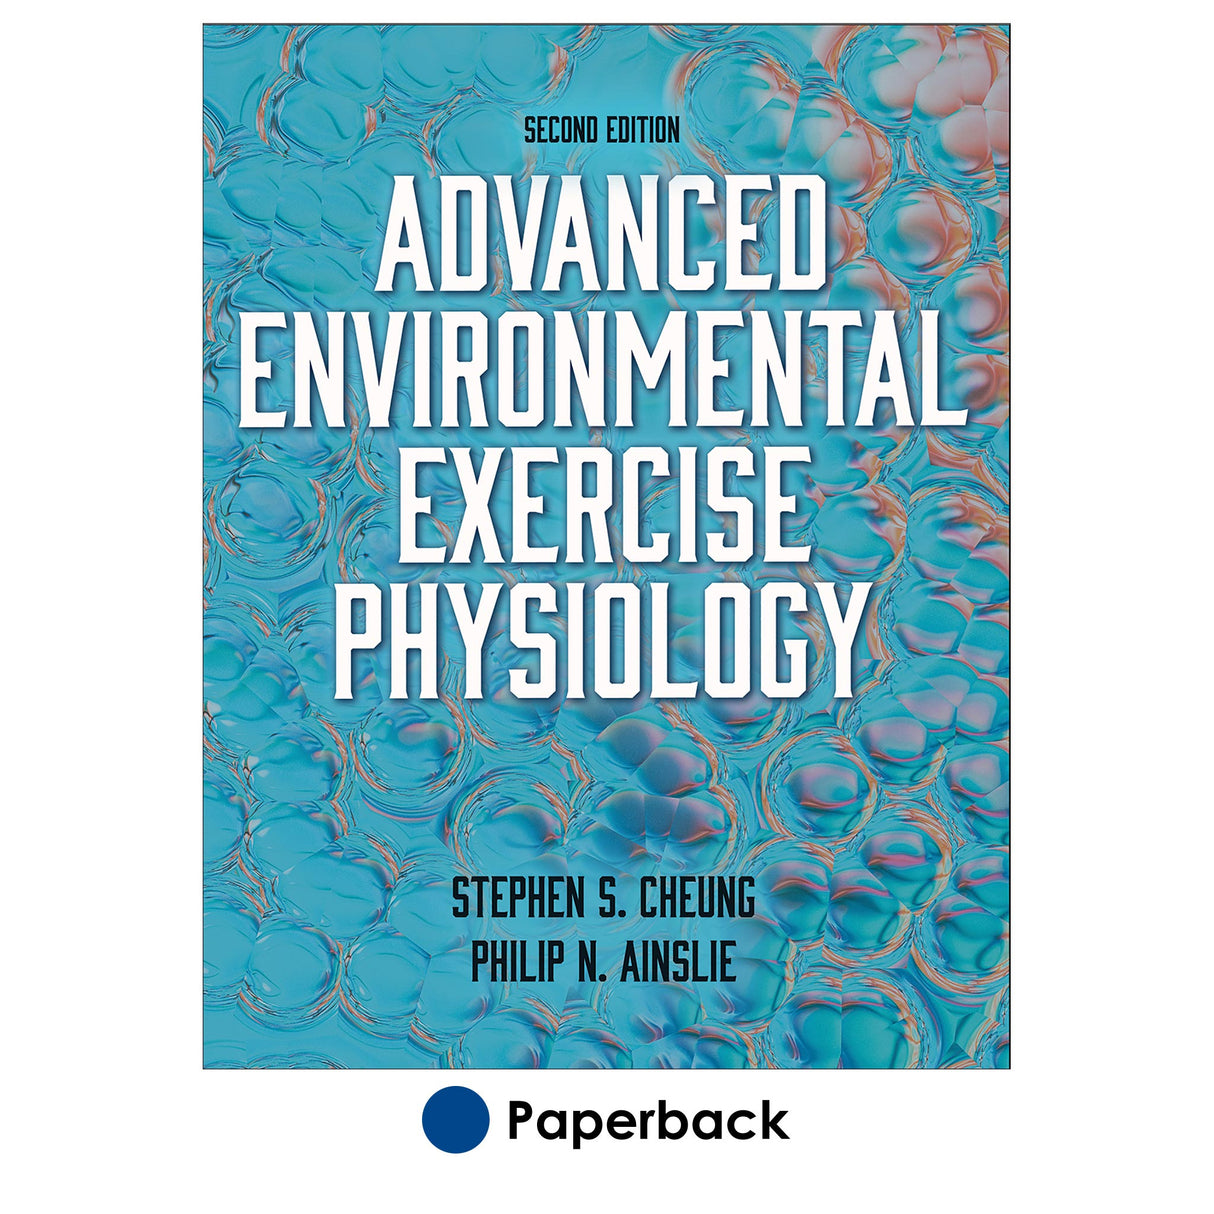 Advanced Environmental Exercise Physiology-2nd Edition